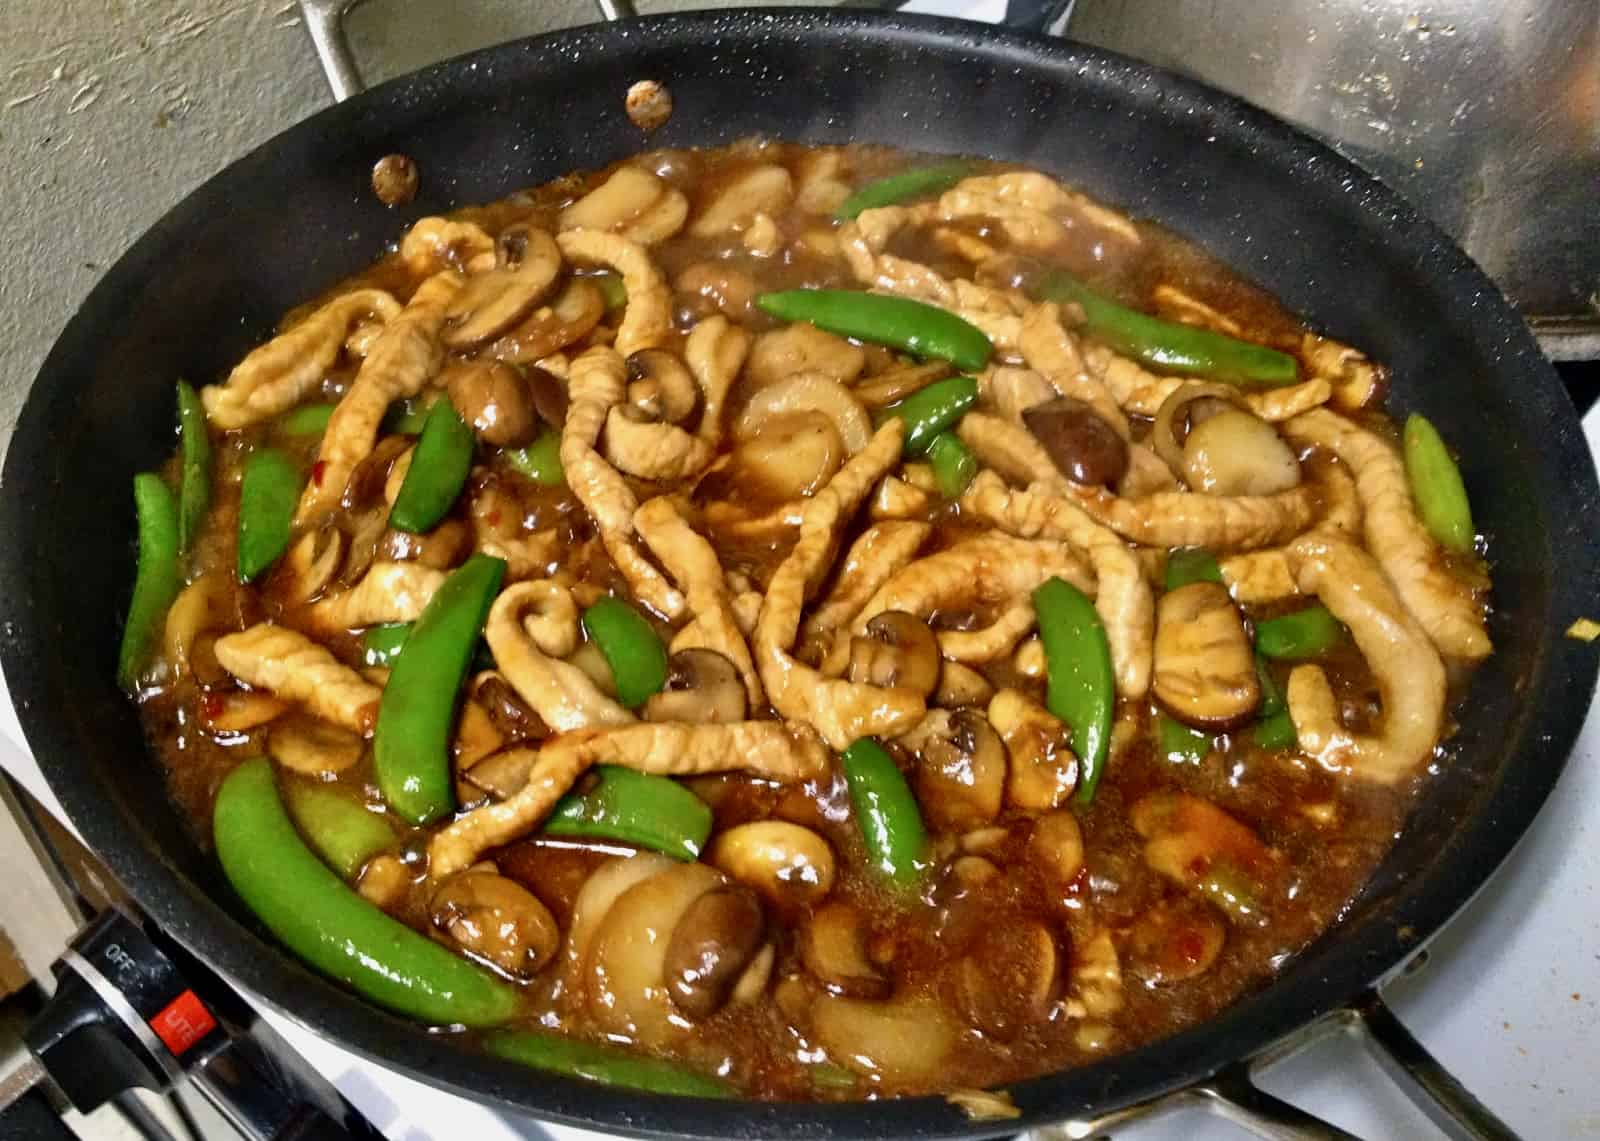 Sichuan Pork in Garlic Sauce with Mushrooms, Water Chestnuts and Snap Peas